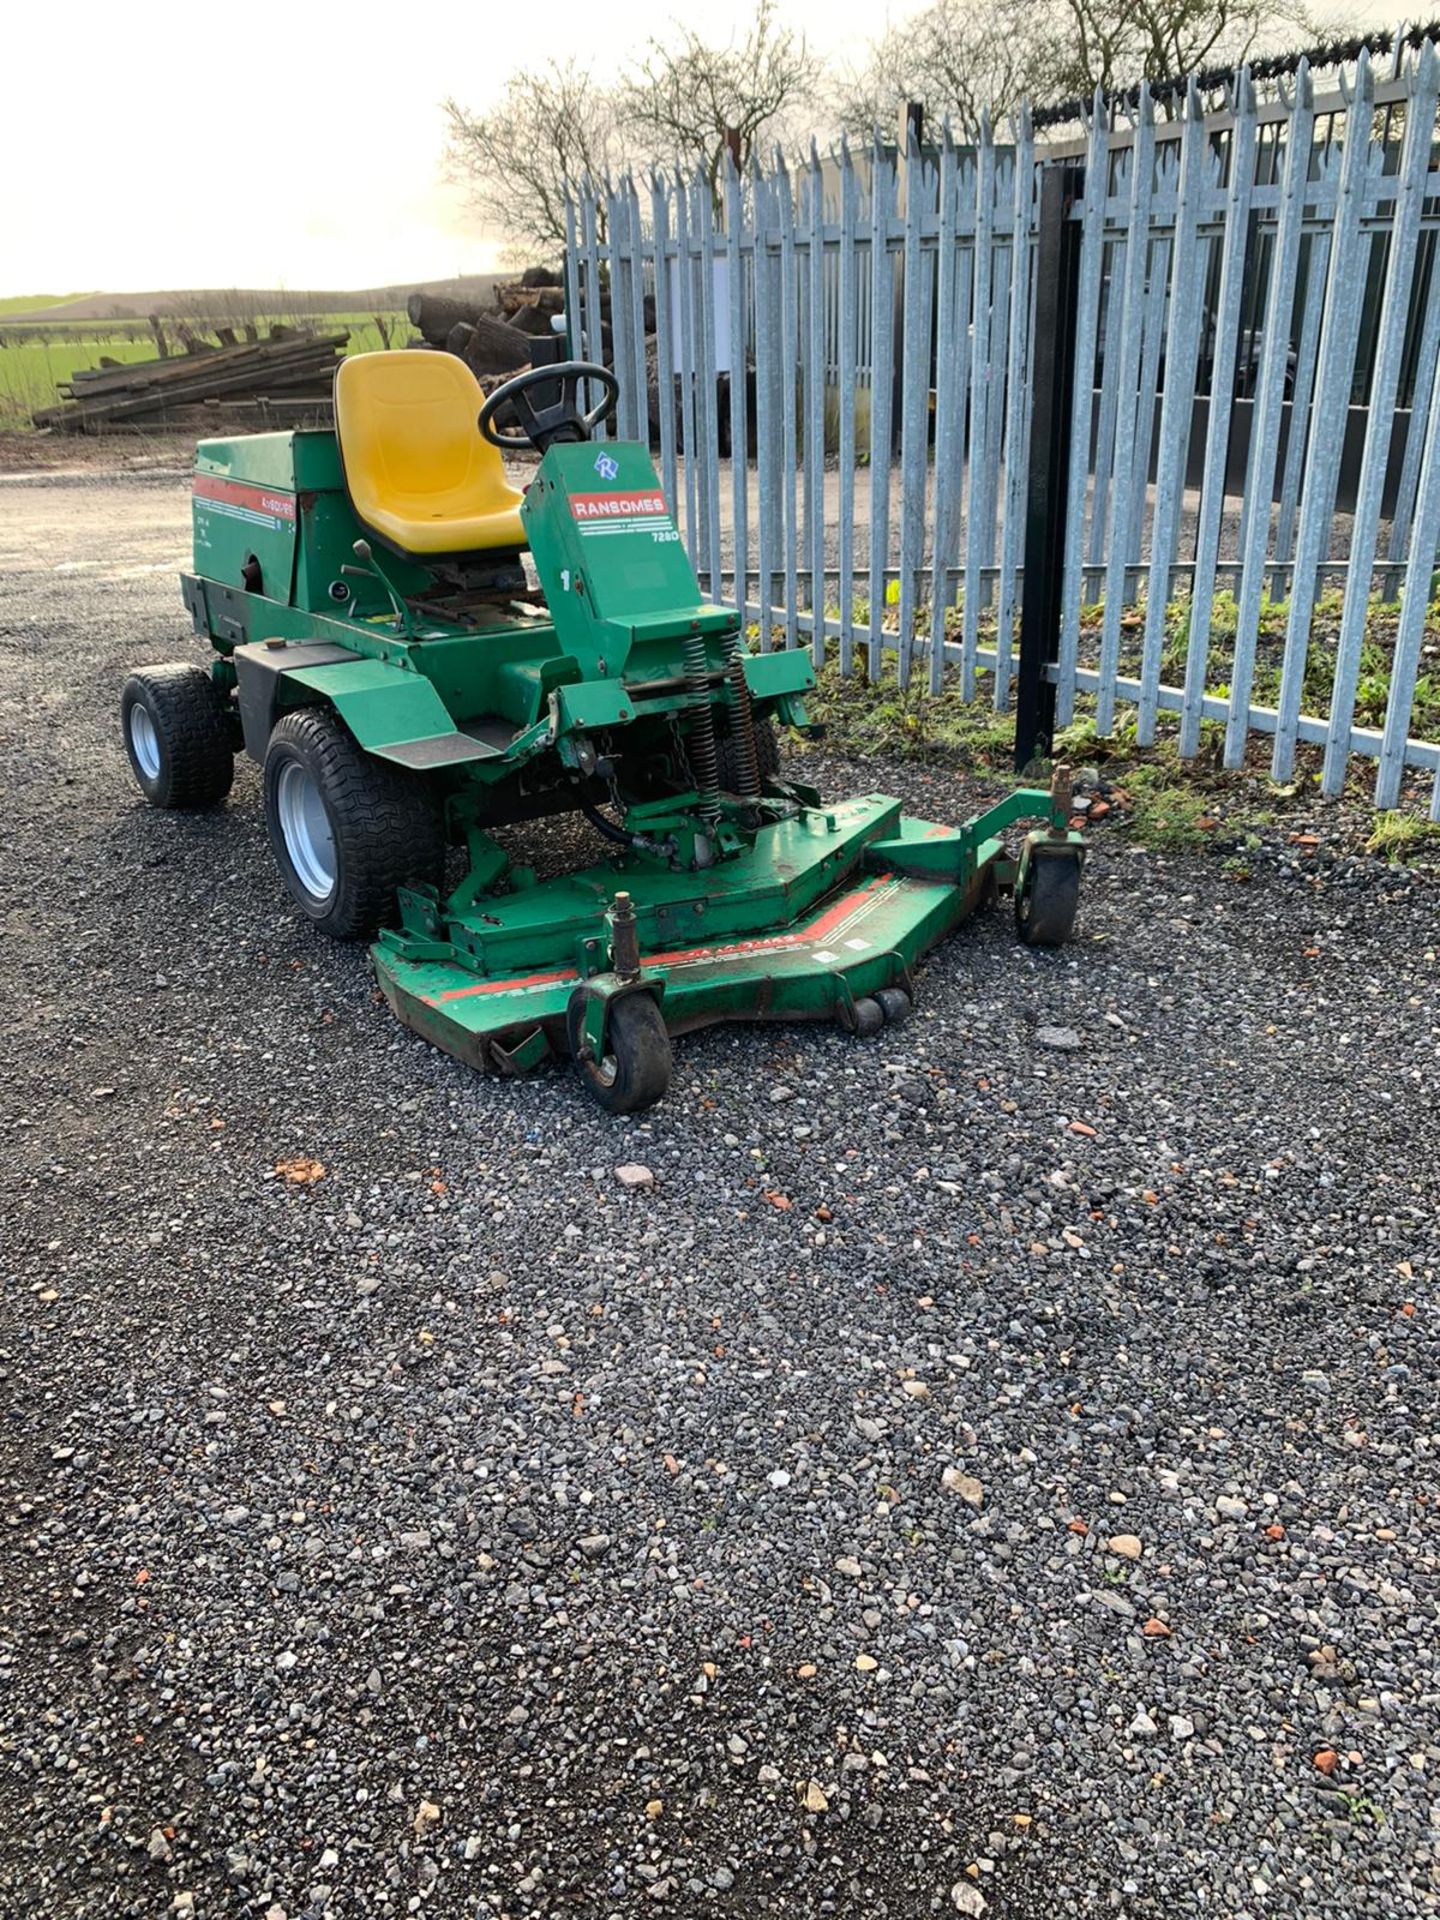 RANSOMES FRONTLINE 728D 4 WHEEL DRIVE DIESEL ROTARY MOWER OUTFRONT DECK 4WD *PLUS VAT* - Image 4 of 10